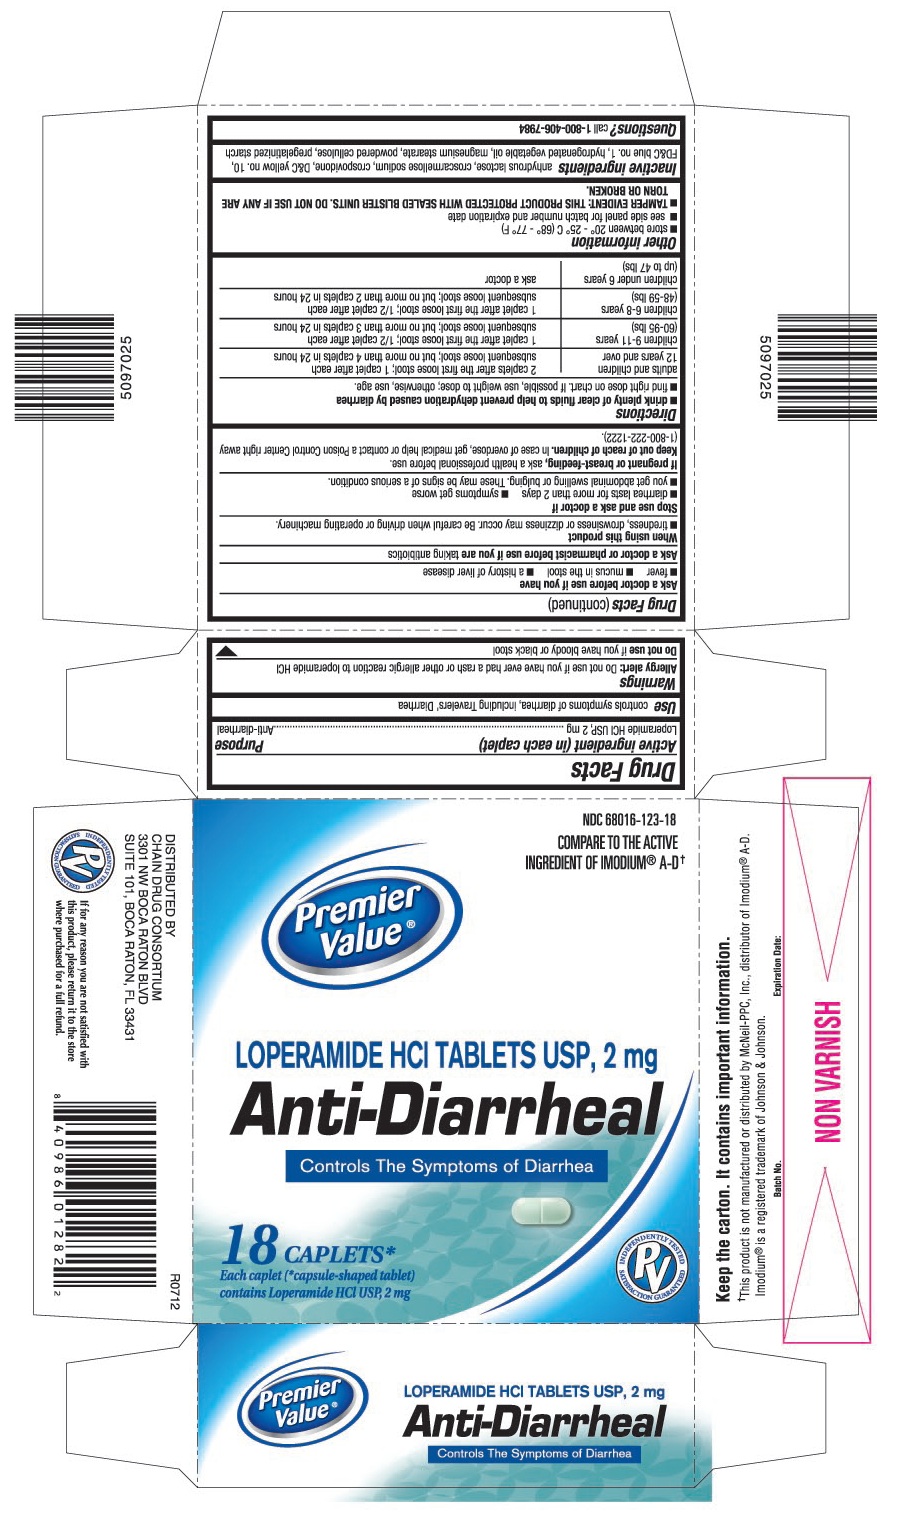 This is the 18 count blister carton label for Loperamide HCl tablets USP, 2 mg.